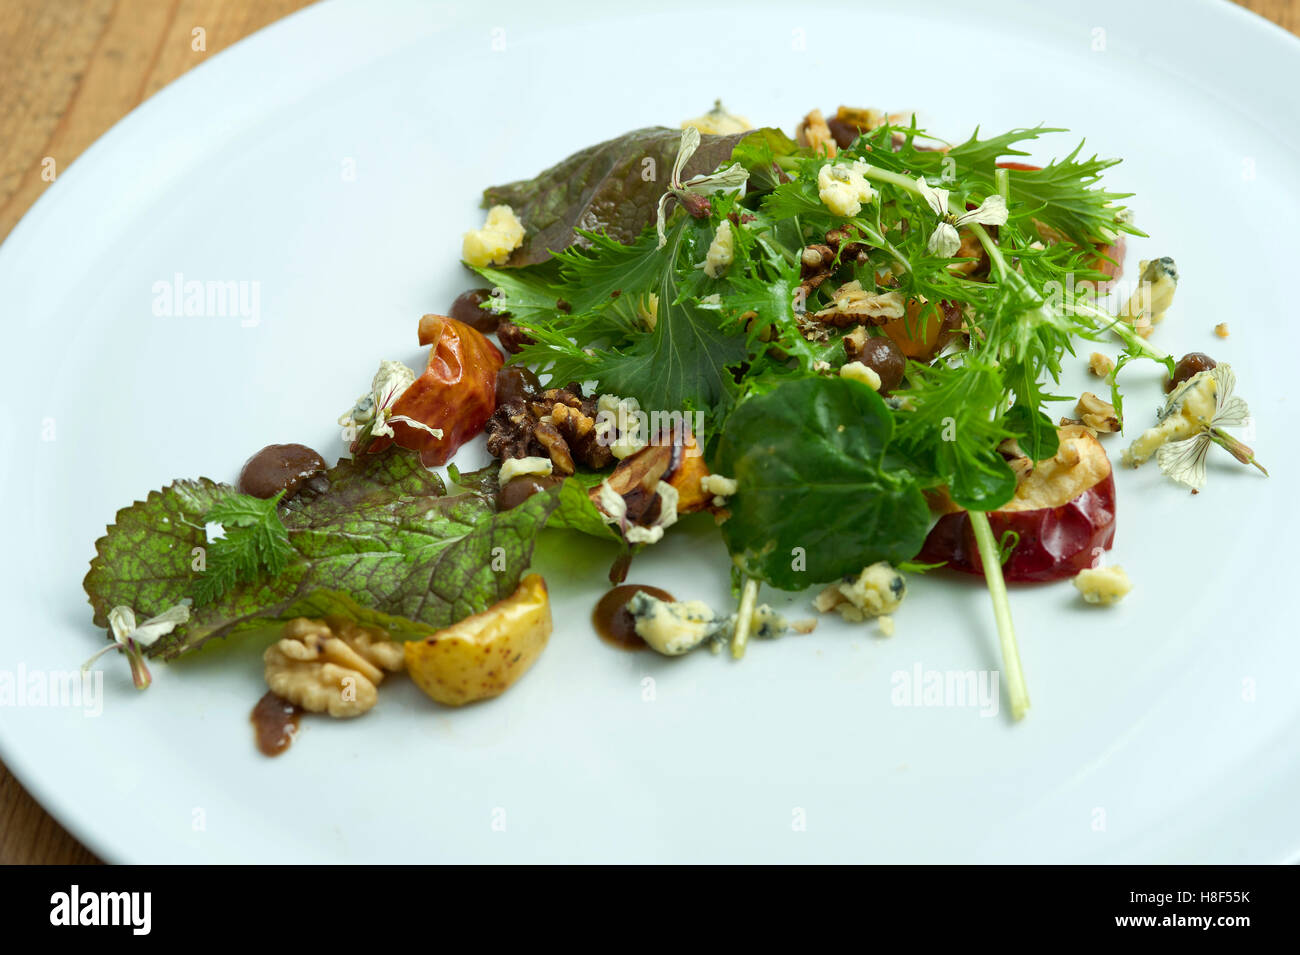 Ethicurian superfood salad Stock Photo